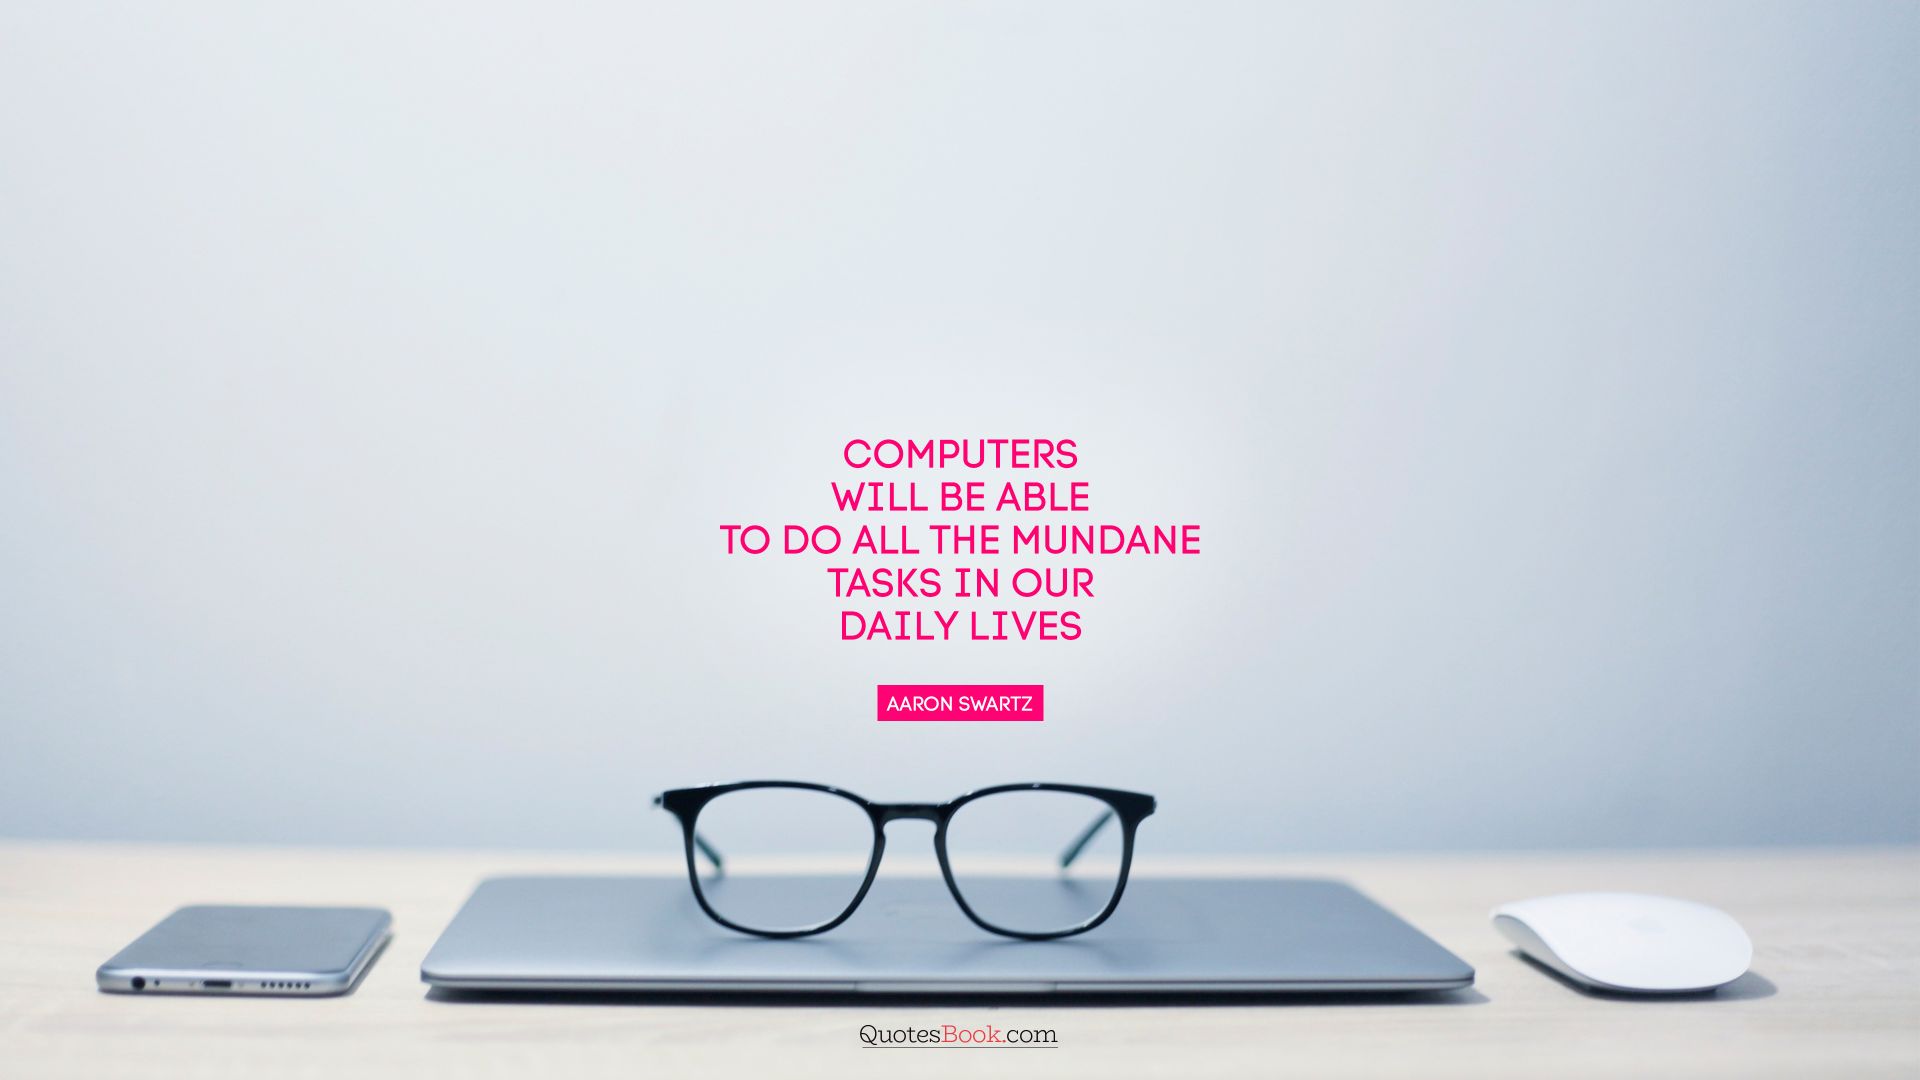 Computers will be able to do all the mundane tasks in our daily lives. - Quote by Aaron Swartz